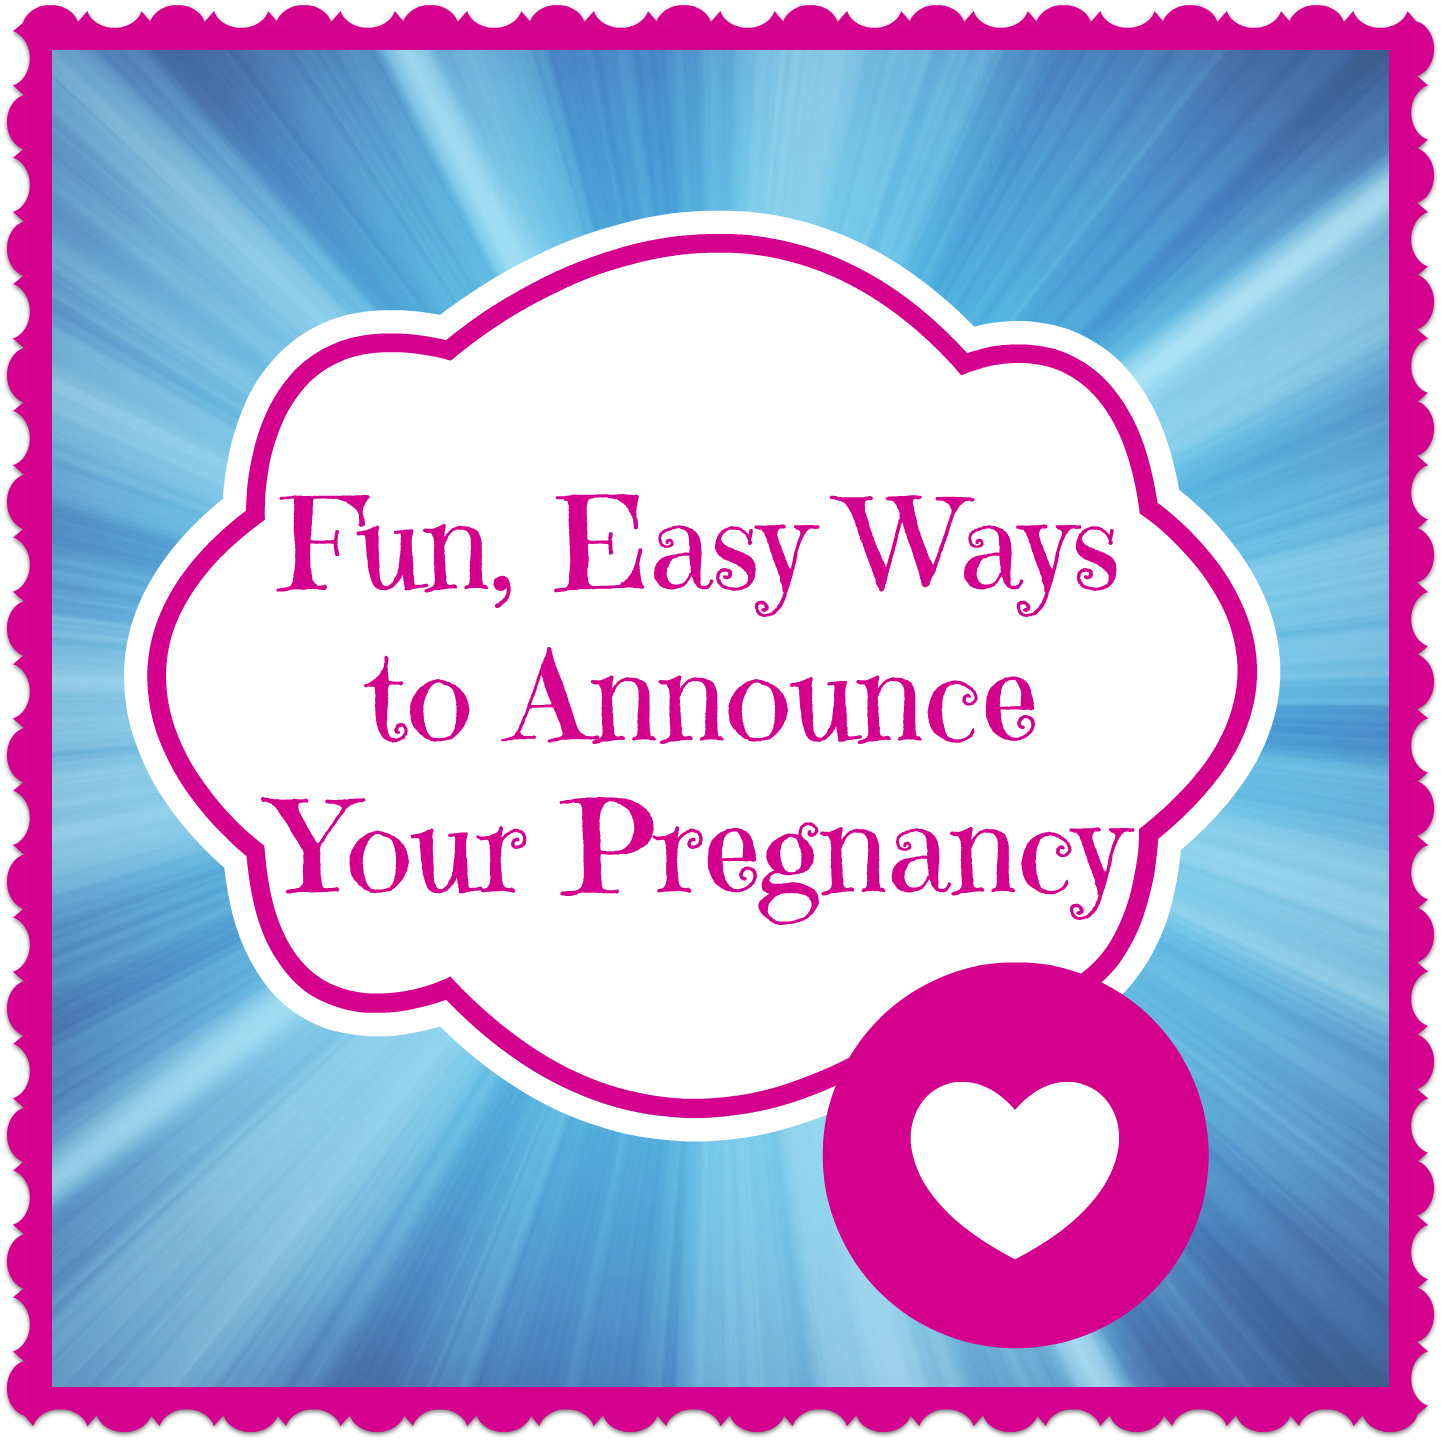 Fun, Easy Ways to Announce Your Pregnancy